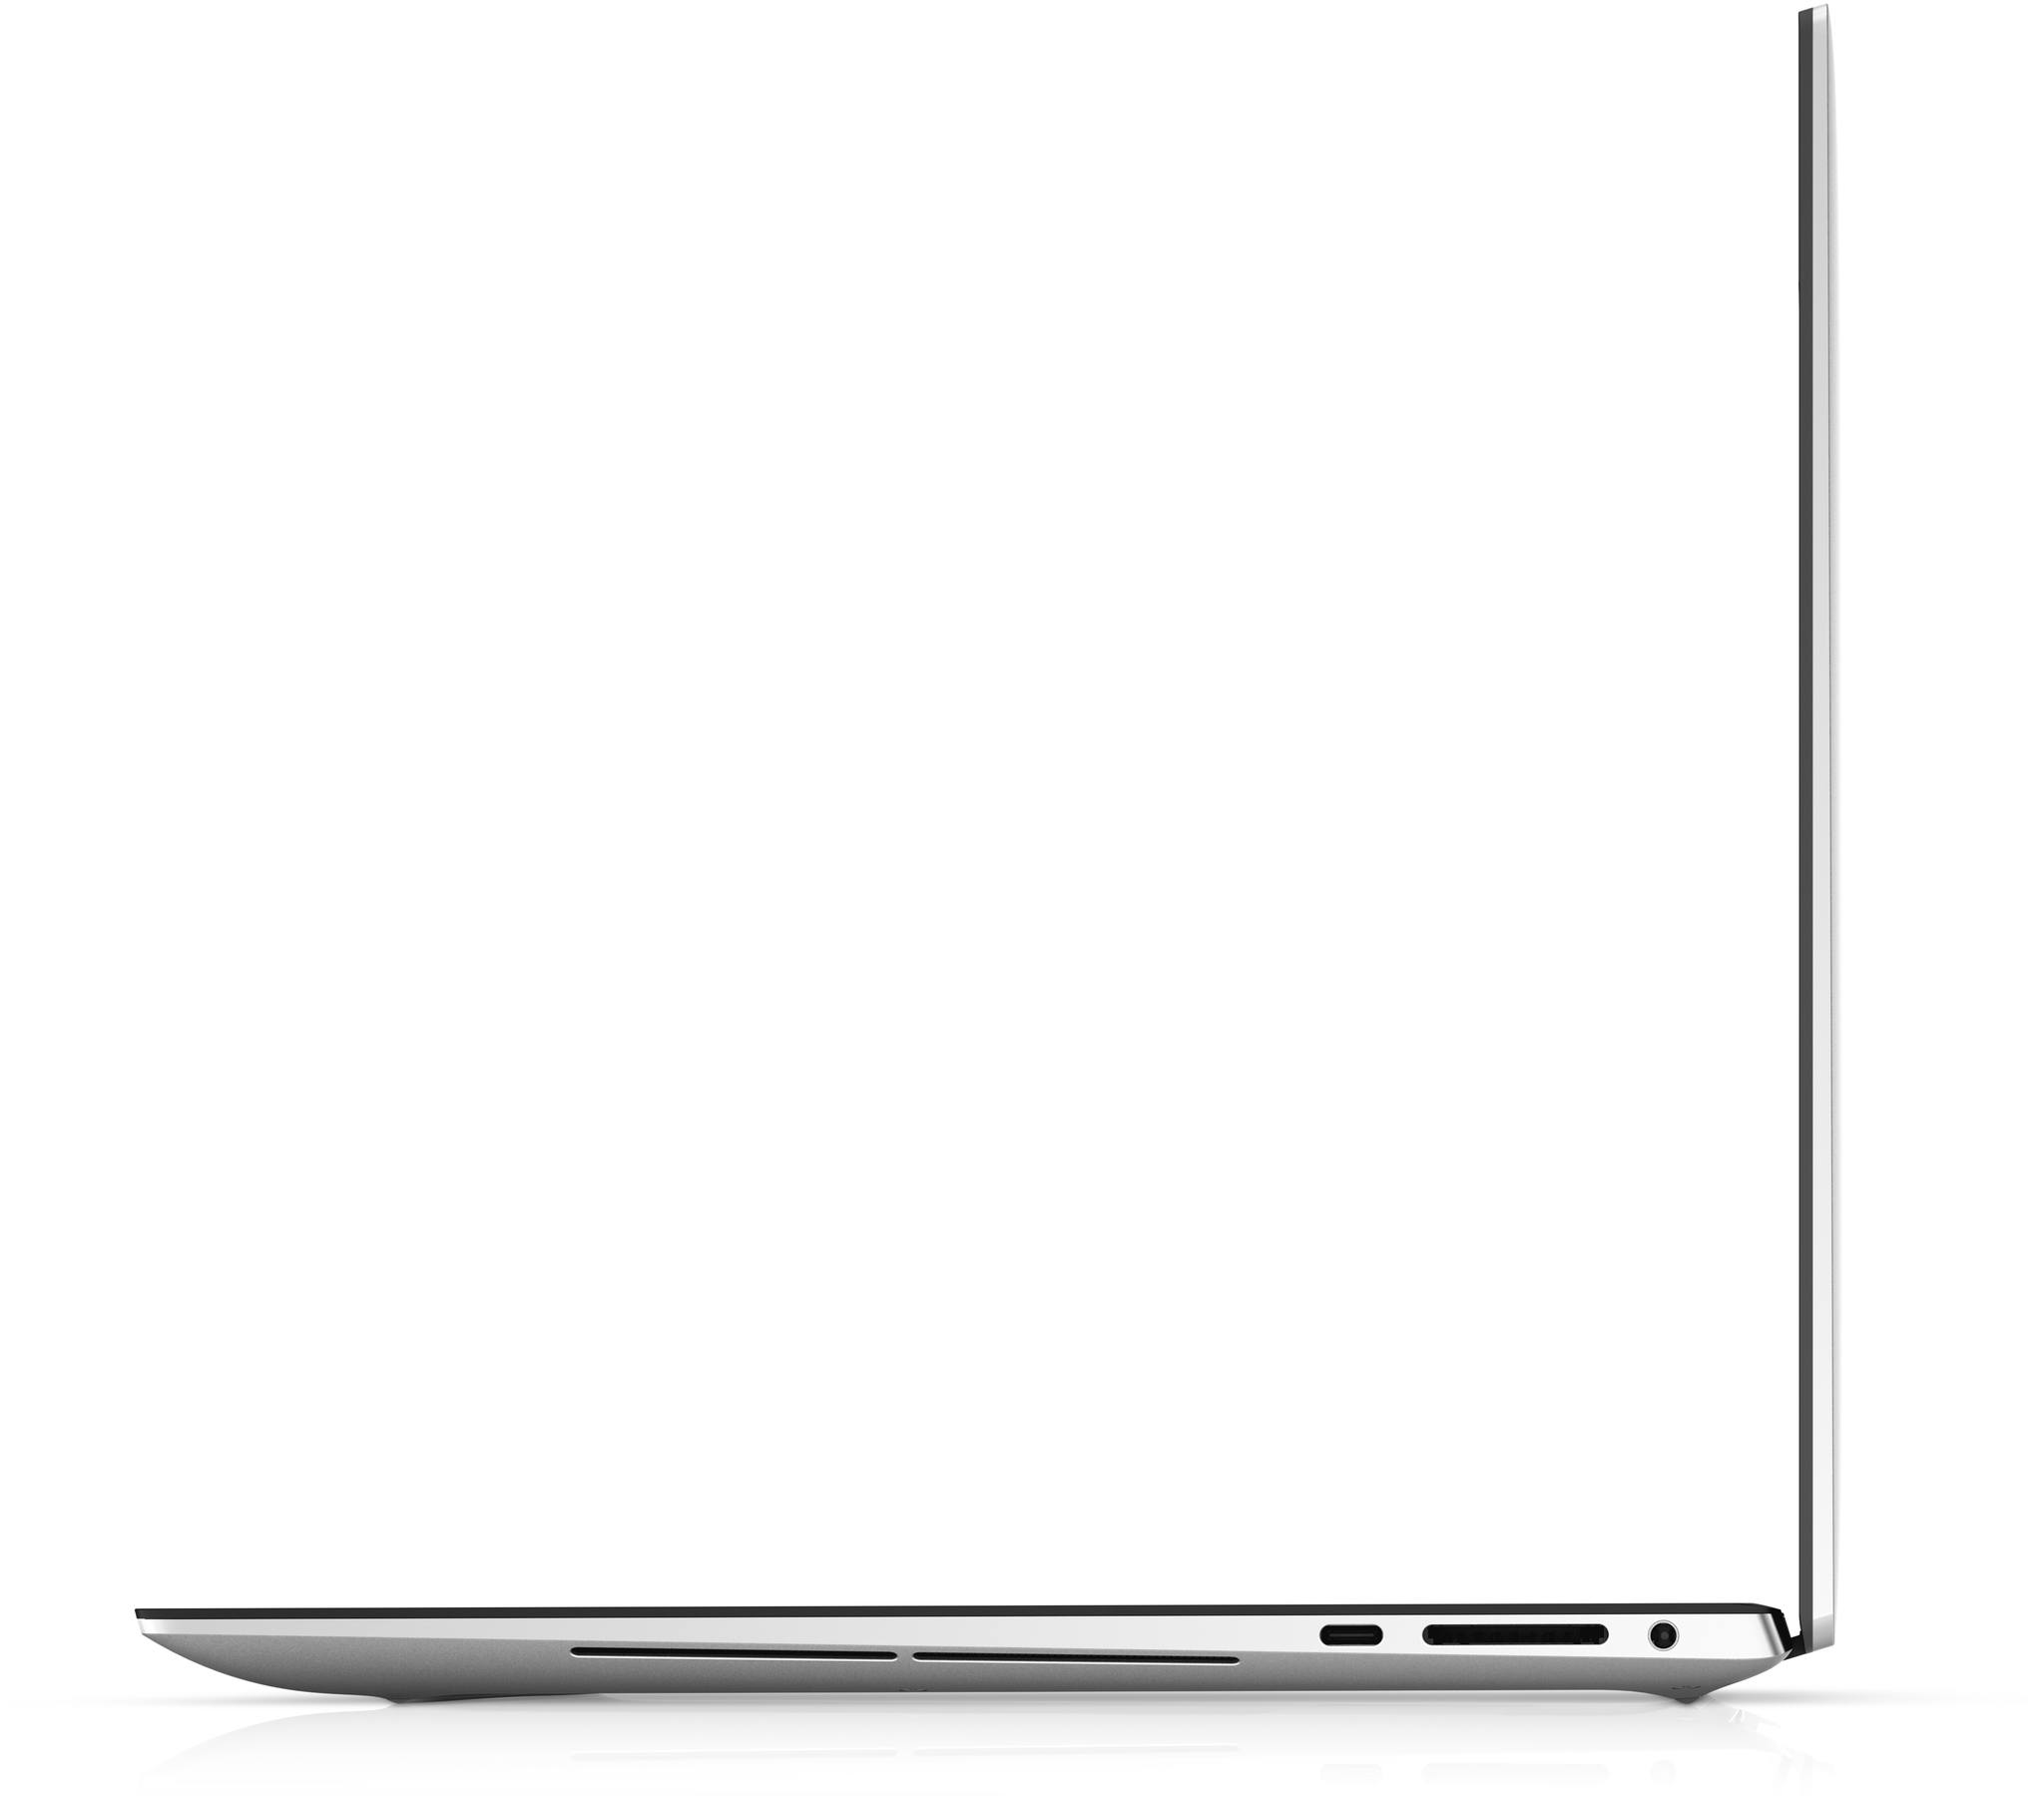 [New 100%] Dell XPS 15 9520 (Core i7-12700H, 32GB, 512GB, RTX 3050, 15.6" OLED 3.5K Touch)